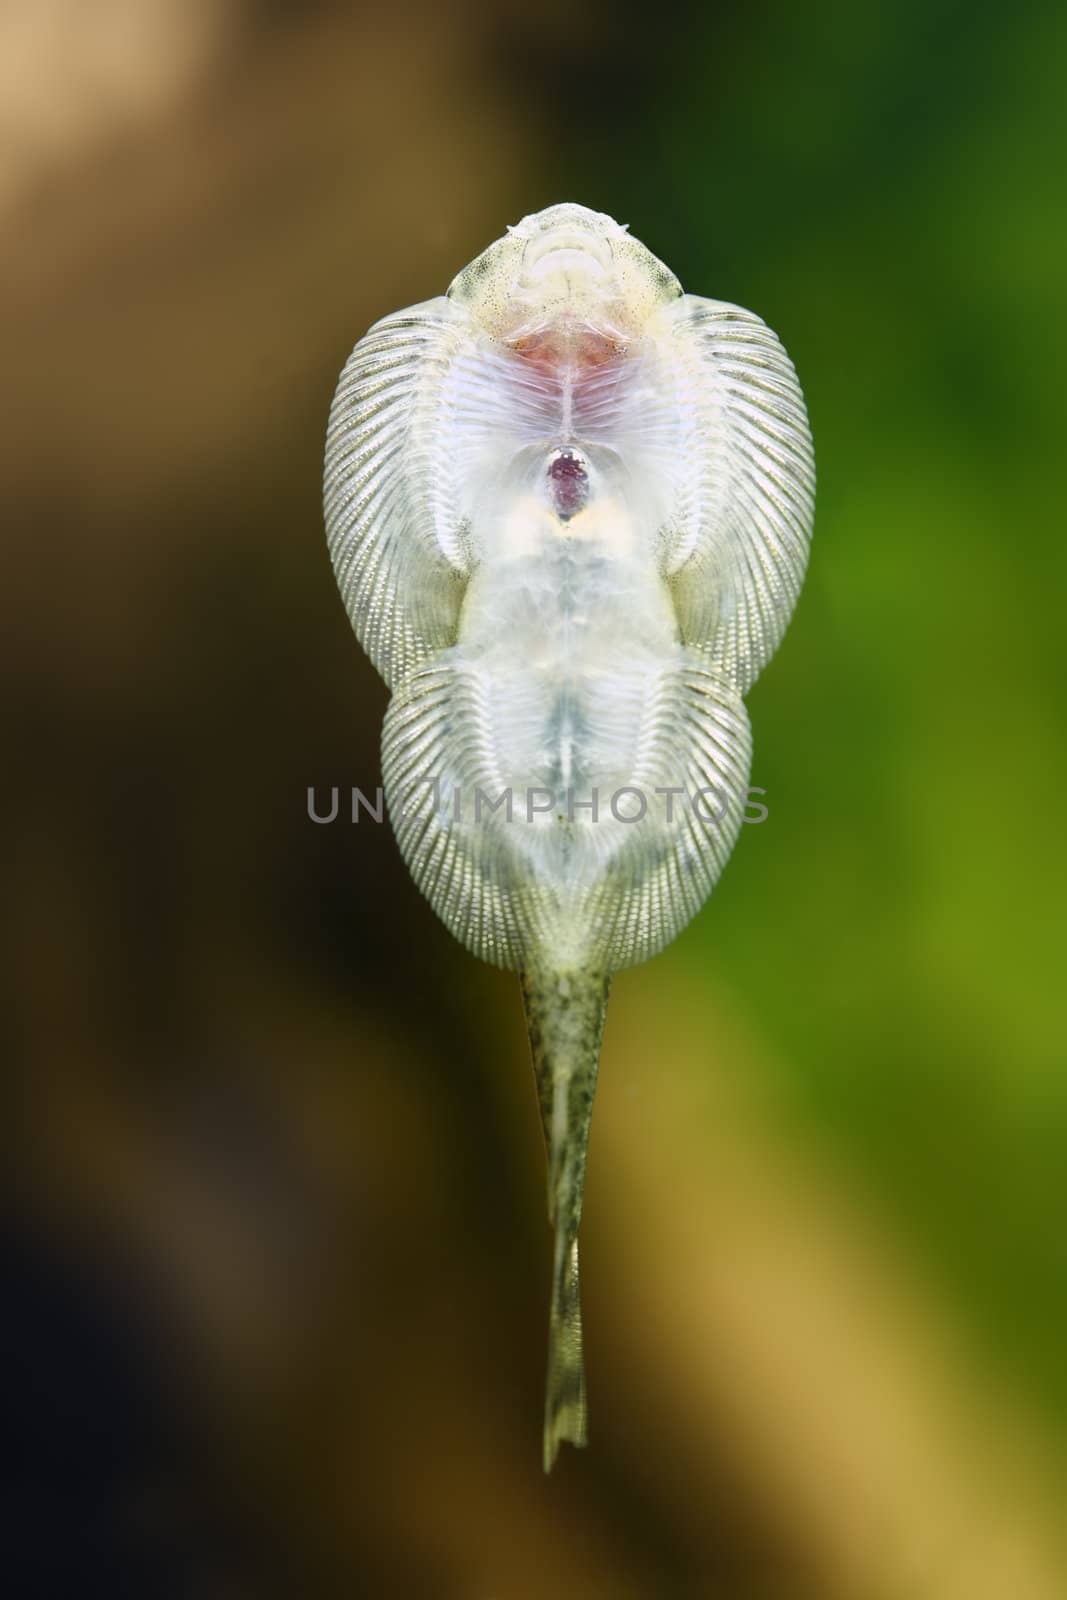 A macro shot of a borneo sucker fish (Gastromyzon Borneensis) suctioned to the glass of an aquarium.